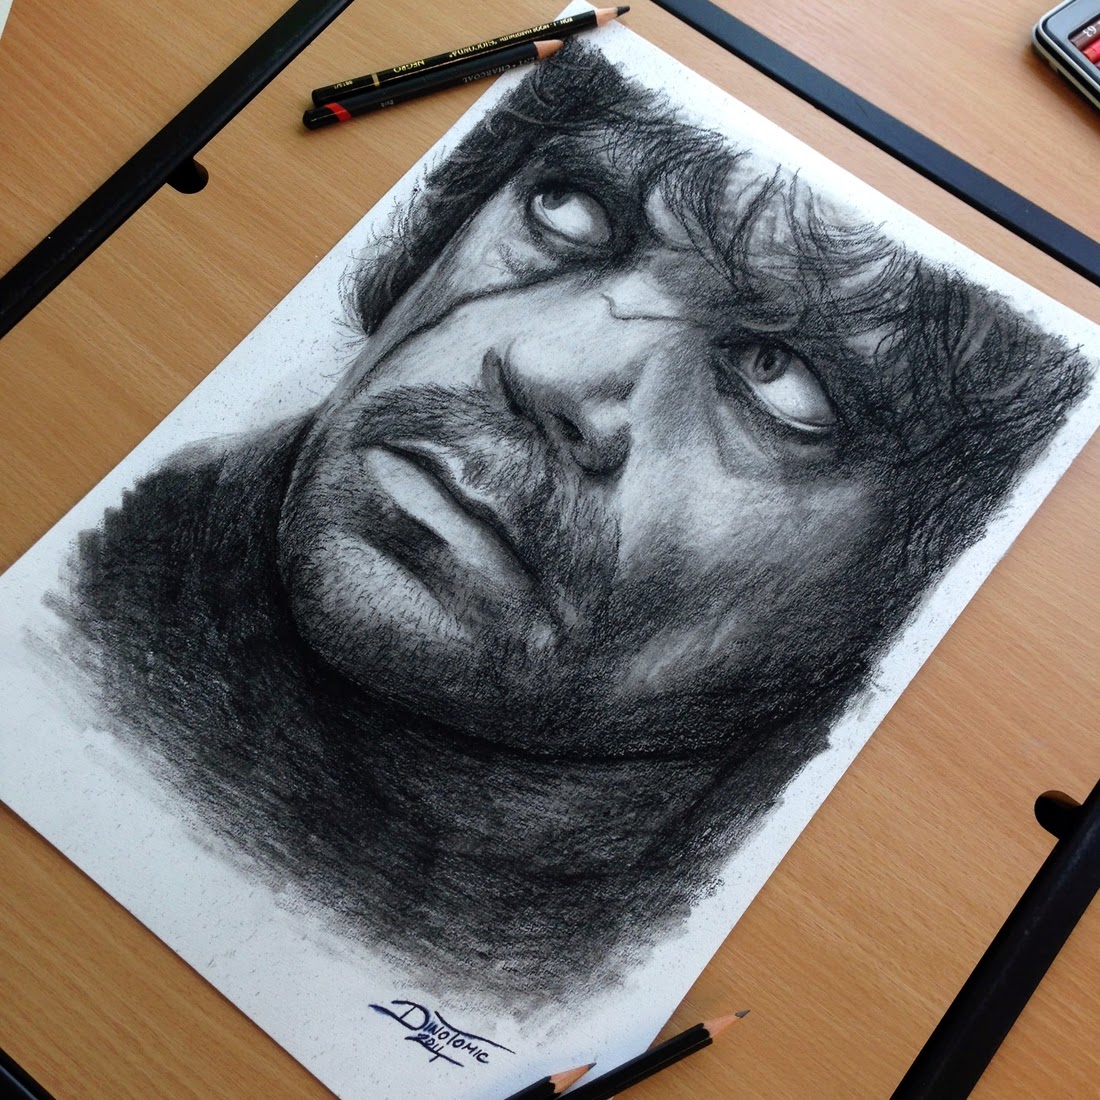 16-Tyrion-Lannister-Peter-Dinklage-Dino-Tomic-AtomiccircuS-Mastering-Art-in-Eclectic-Drawings-www-designstack-co